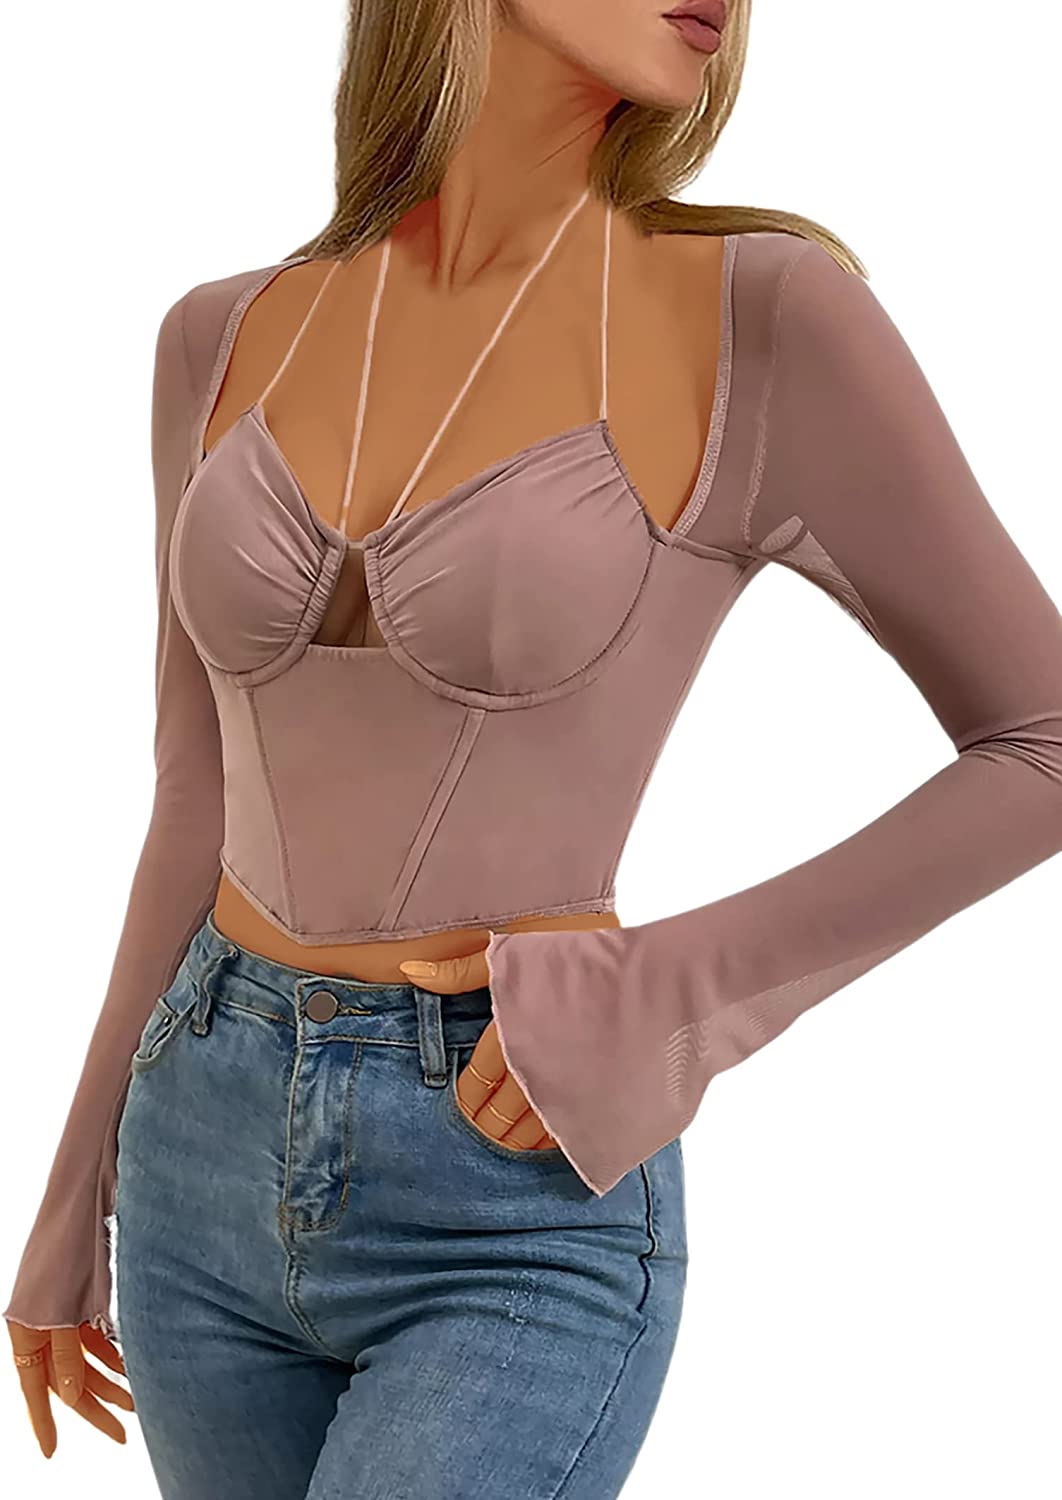 DanceeMangoos Womens Long Sleeve Corset Top Sexy Mesh Sheer Crop Tops Going Out Party Clubwear - image 2 of 7